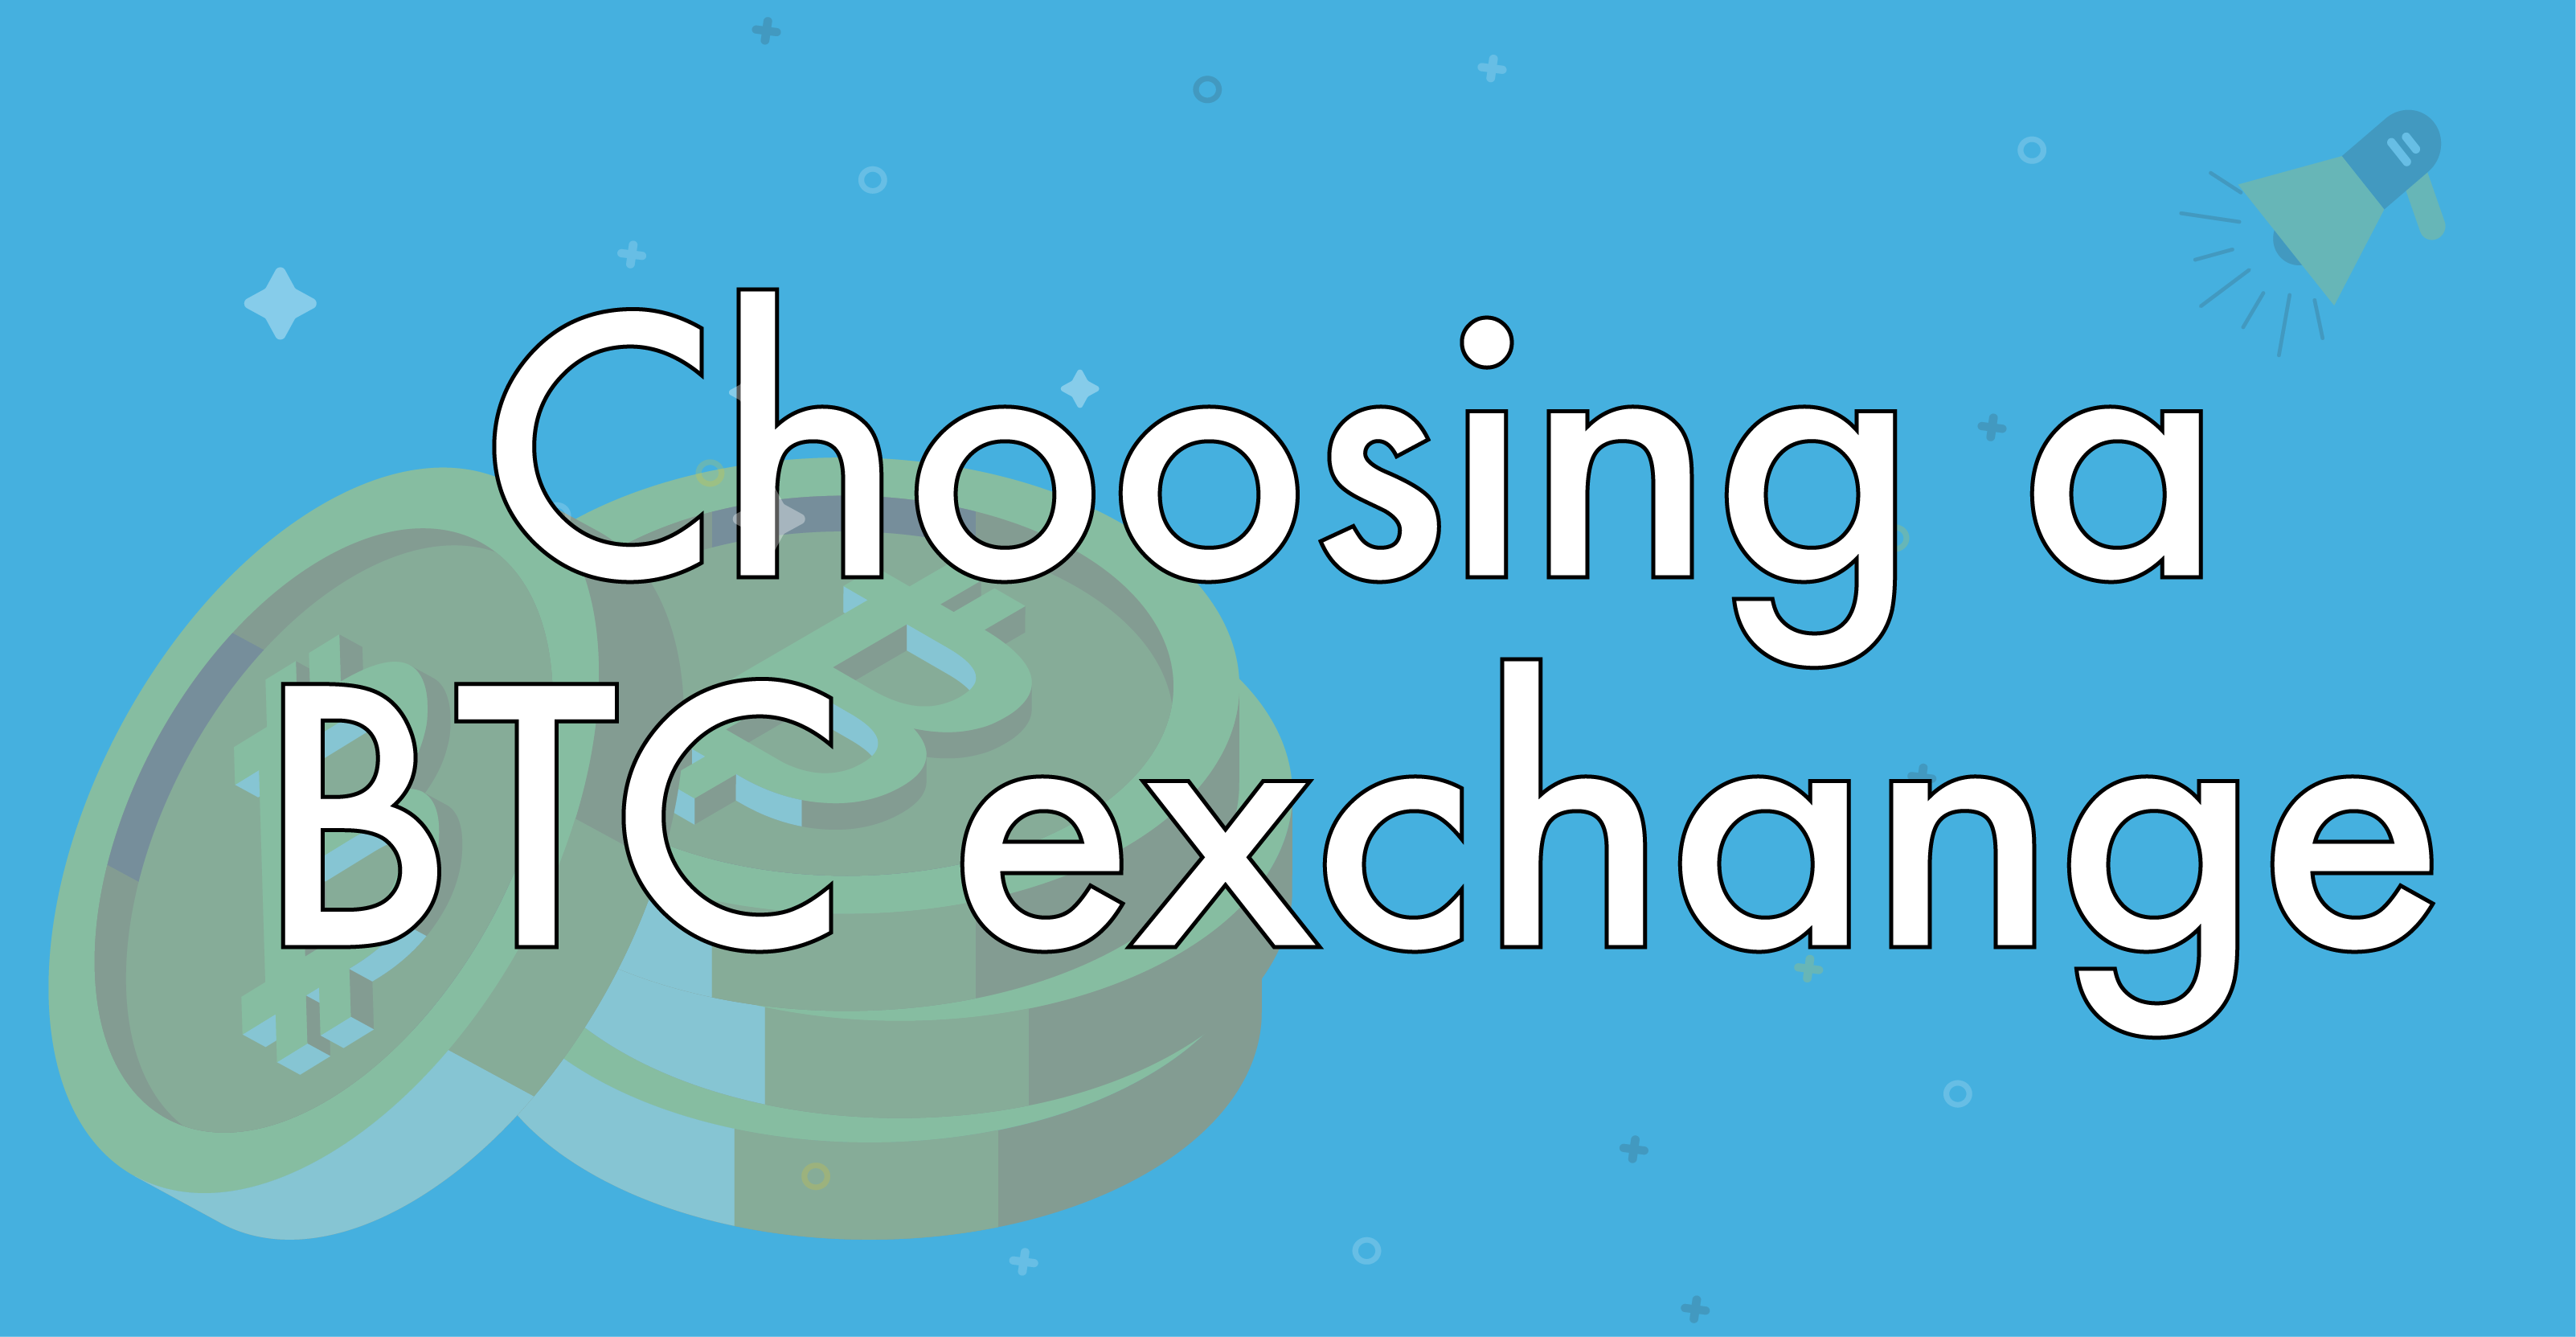 How to choose which exchange to buy Bitcoin from